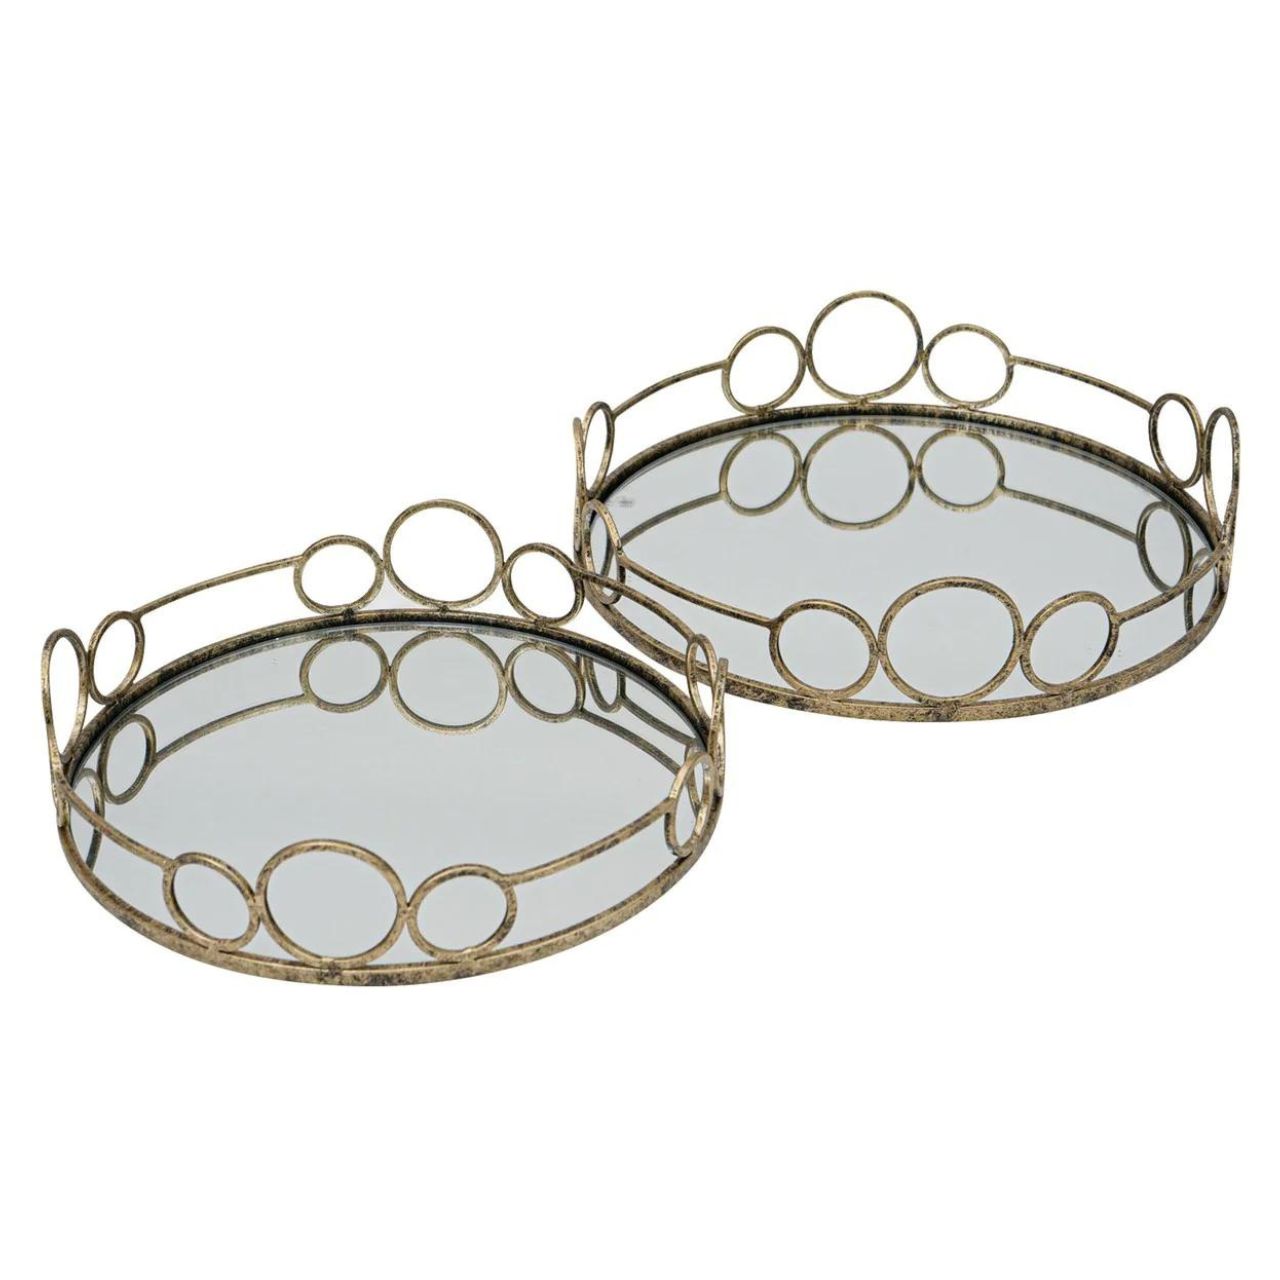 Mindy Brownes Remy Trays Set of 2  Set of two mirrored trays, Serve your drinks or nibbles in style on this deco mirror tray. Beautifully constructed from glass and metal, it's sure to make an impact. Antique gold in finish.